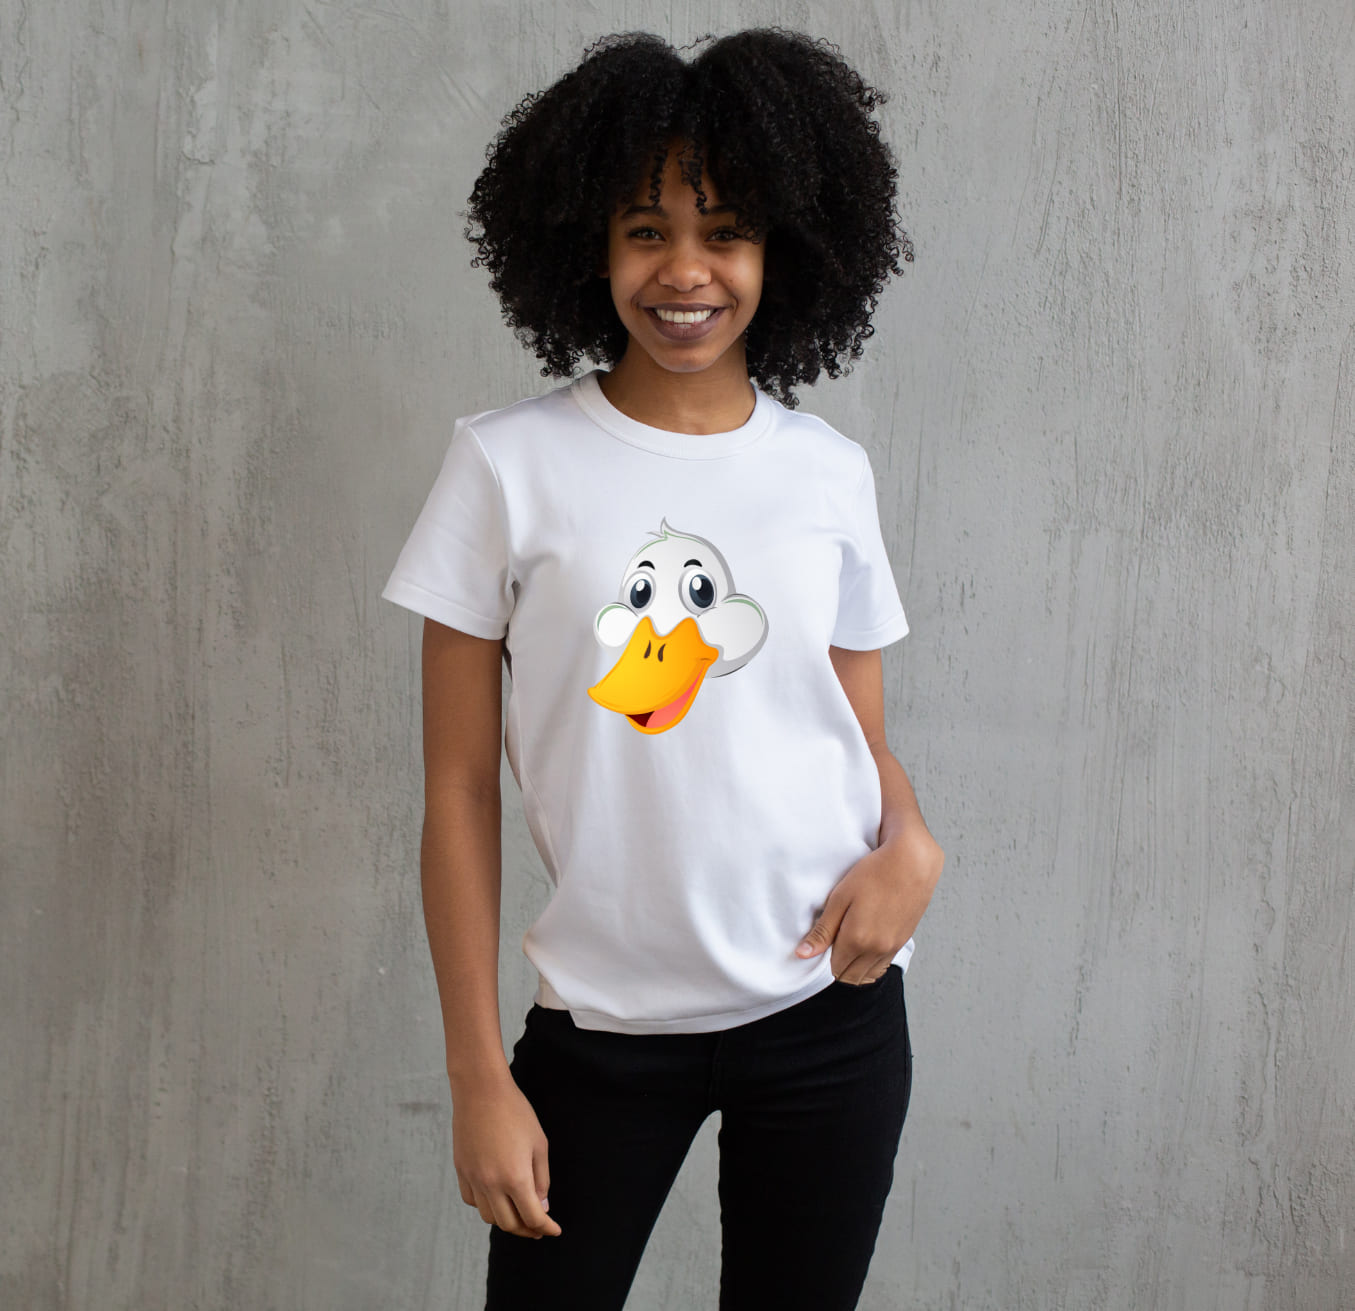 Image of a white t-shirt with a unique duck head print.